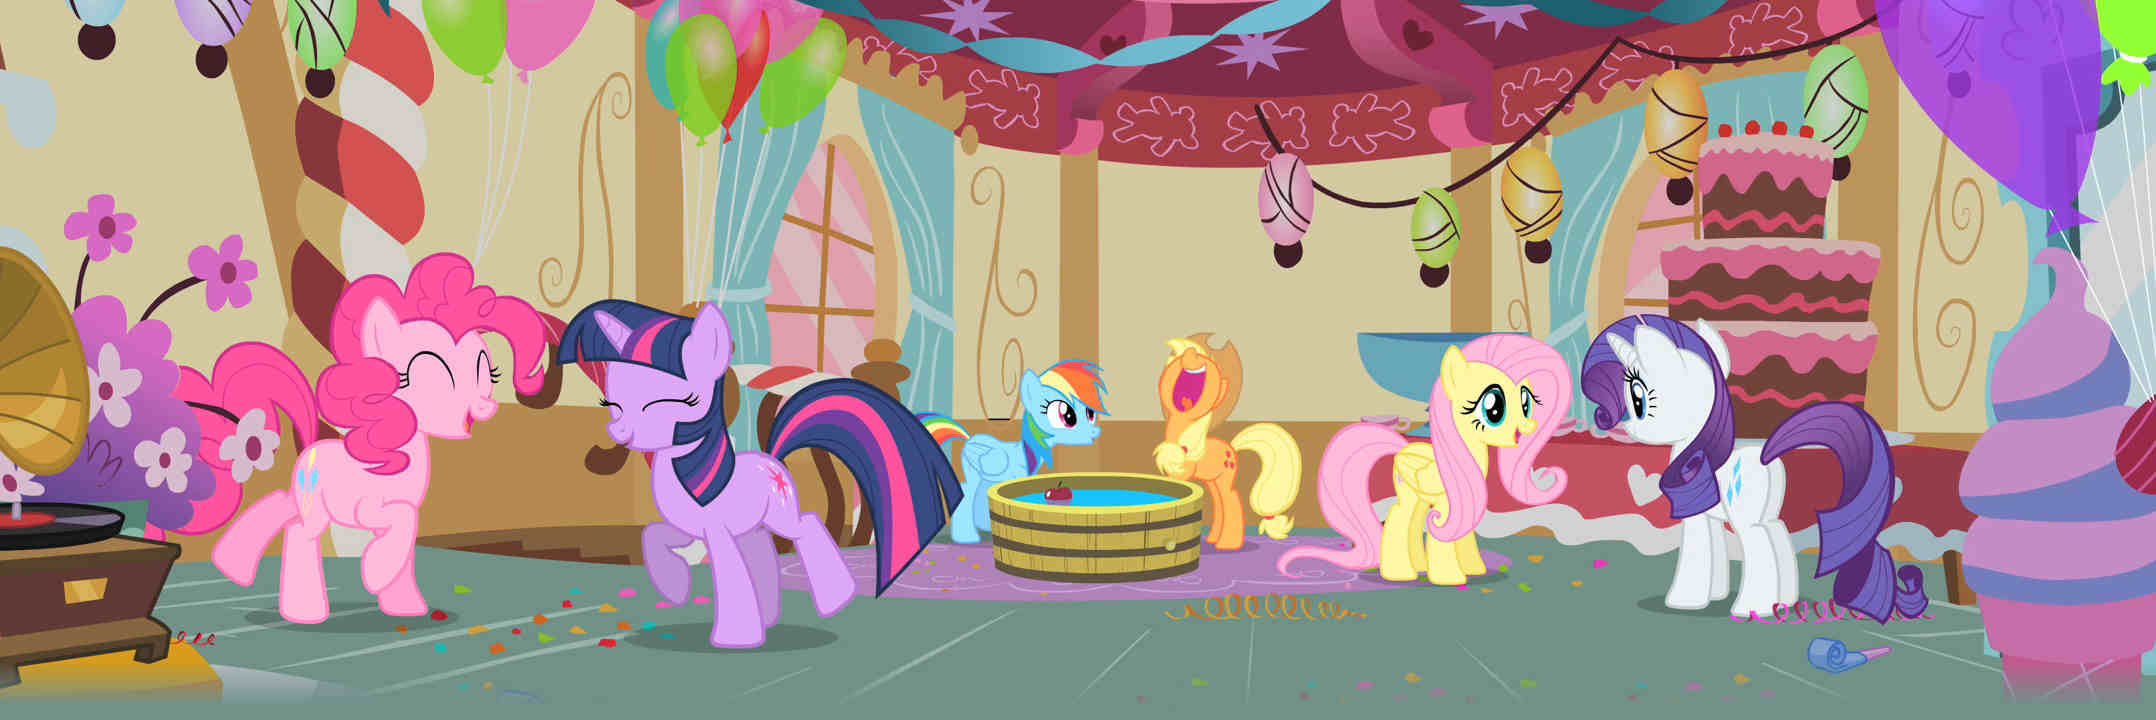 Pinkie_Pie_Gummy_party_panorama_for_background_S1E25.jpg